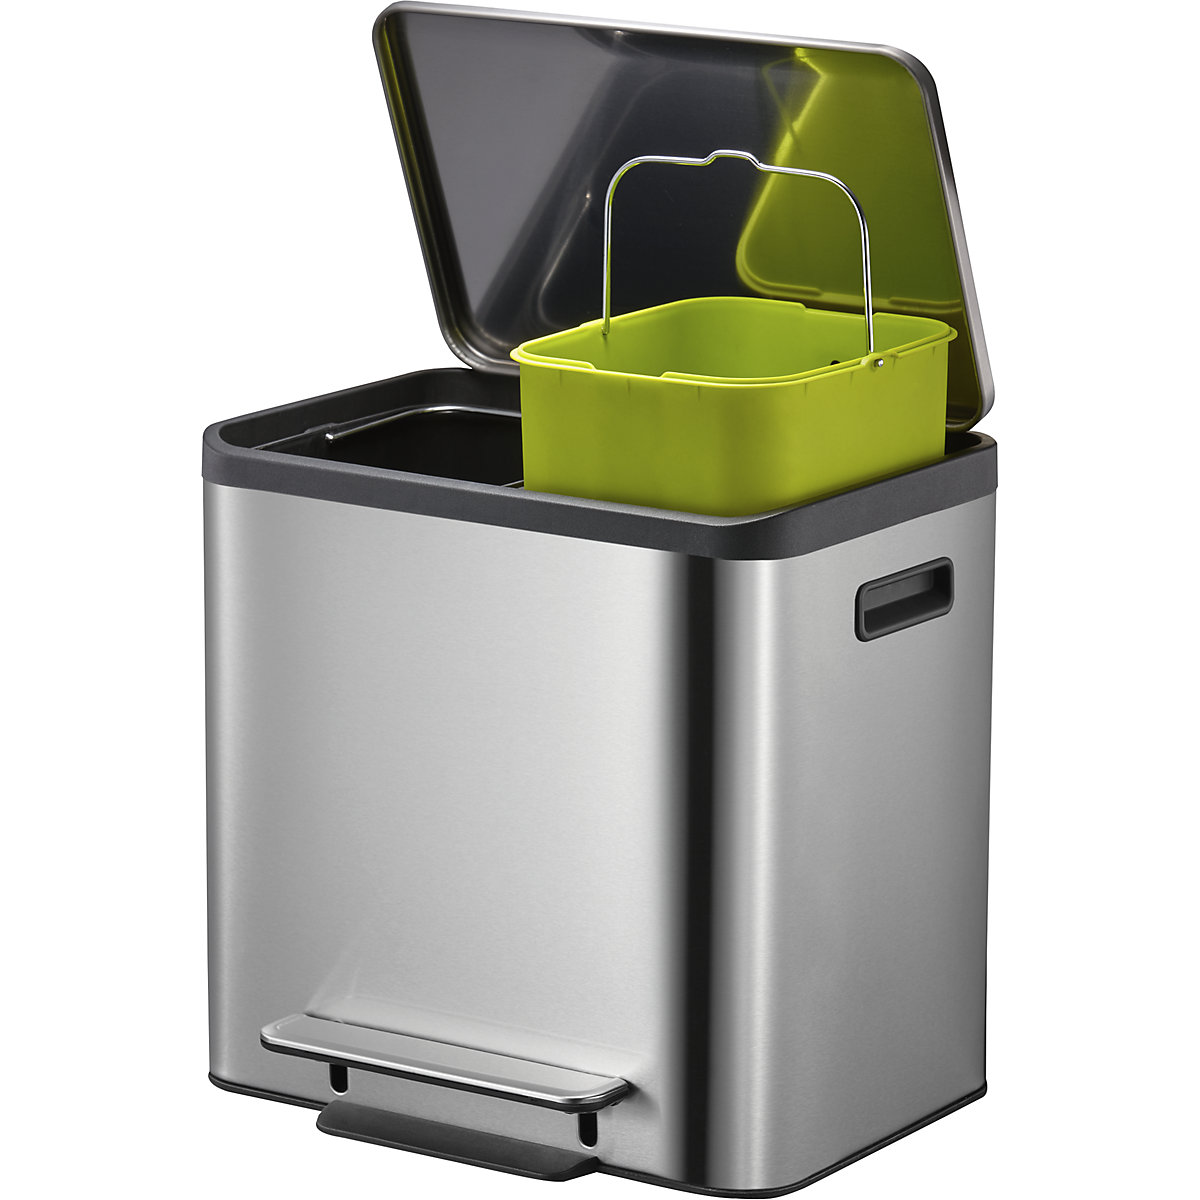 Waste collector with pedal – EKO